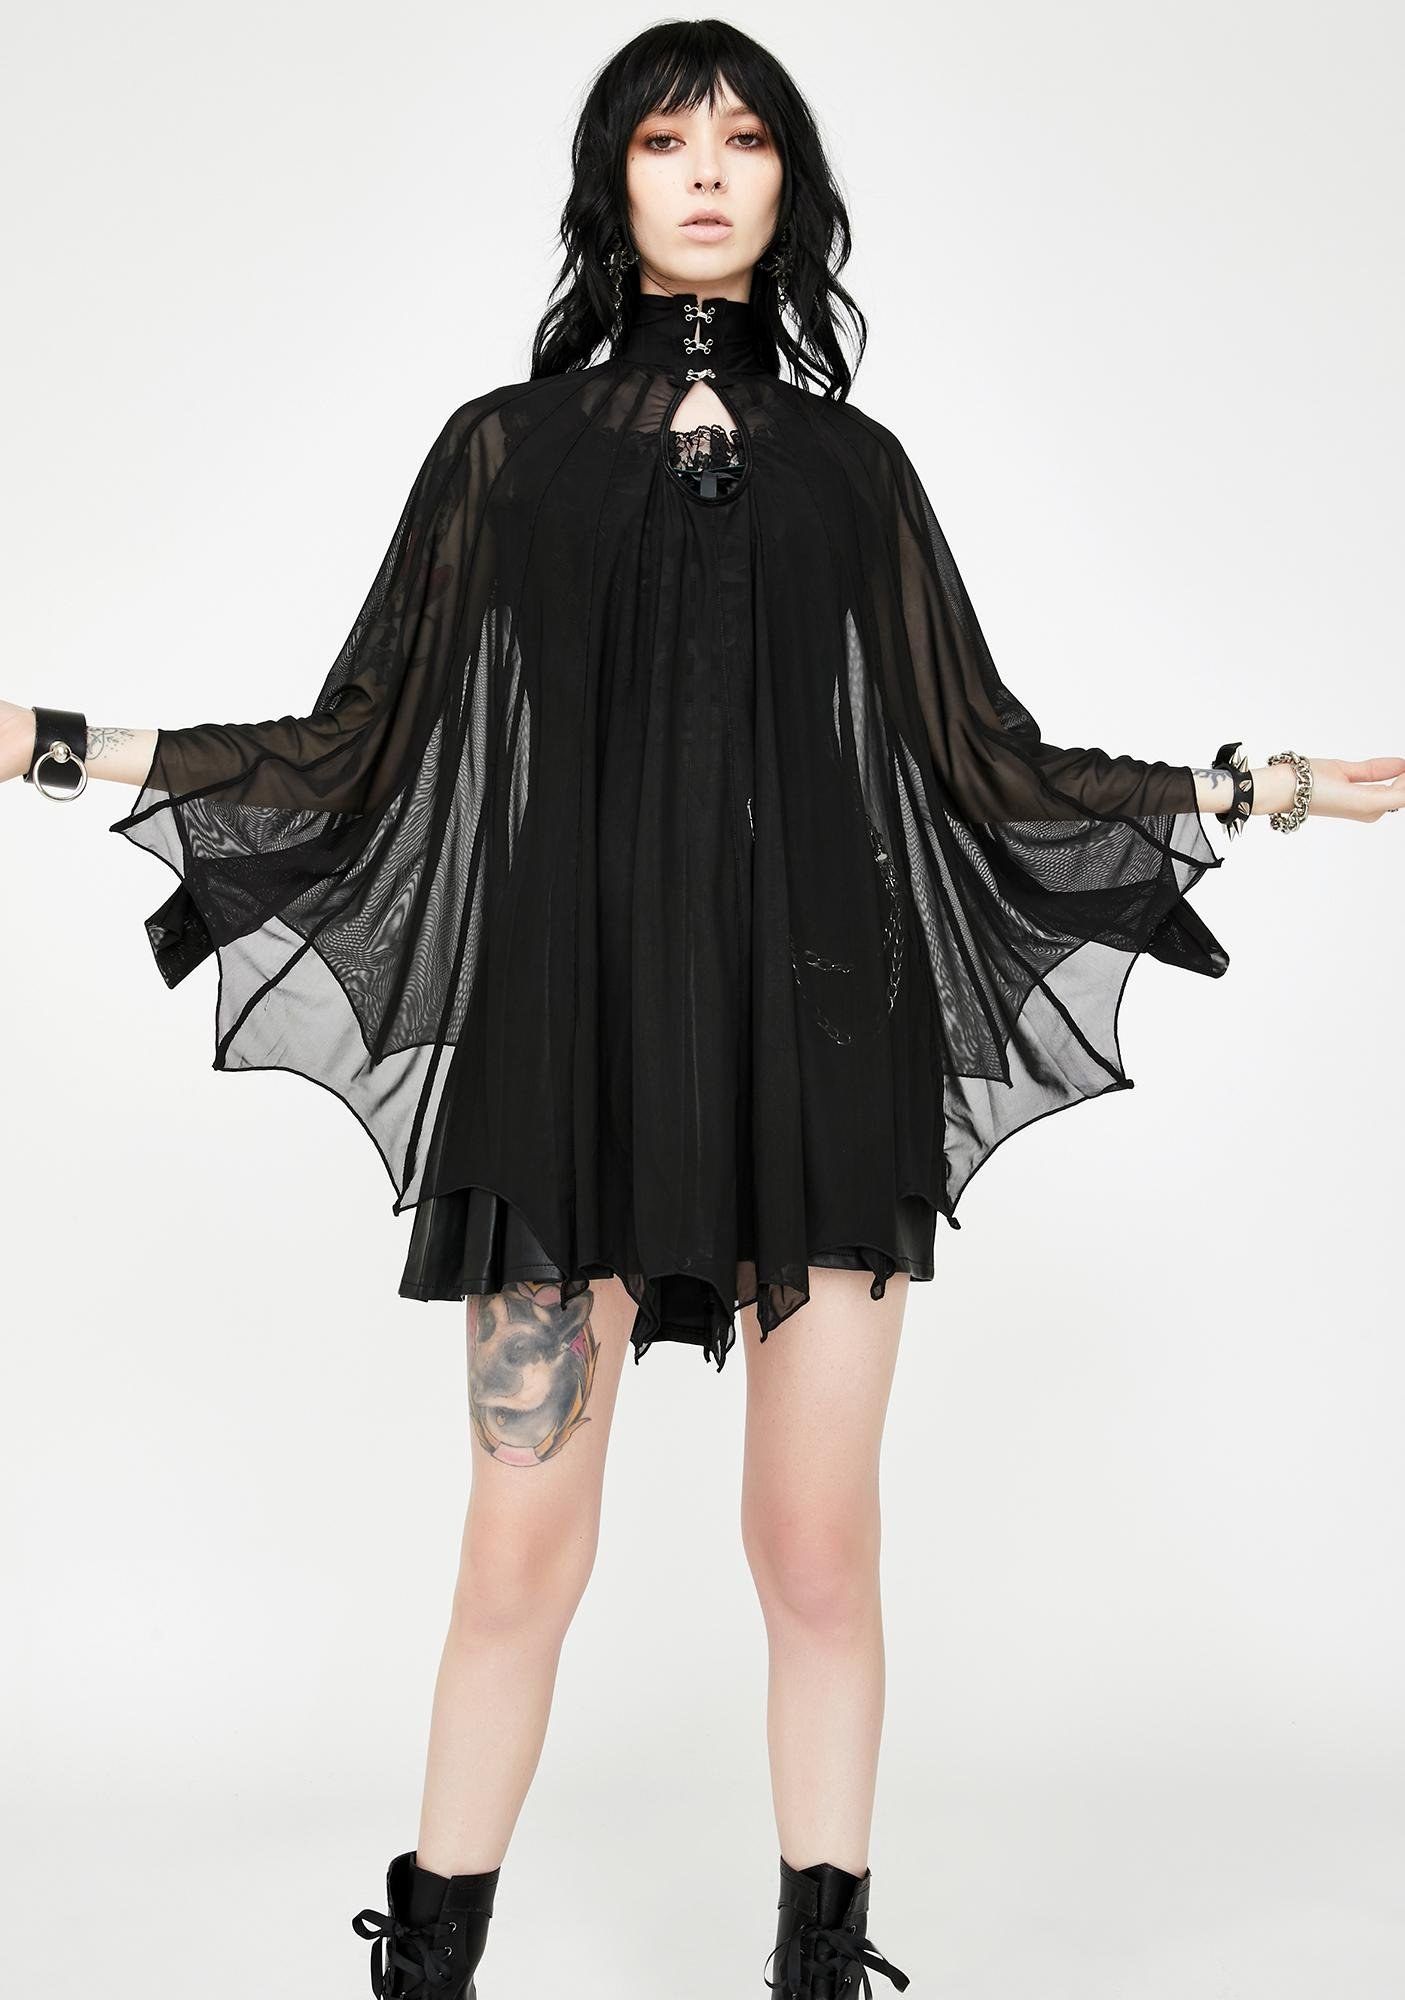 Batwing Dress Outfit Ideas